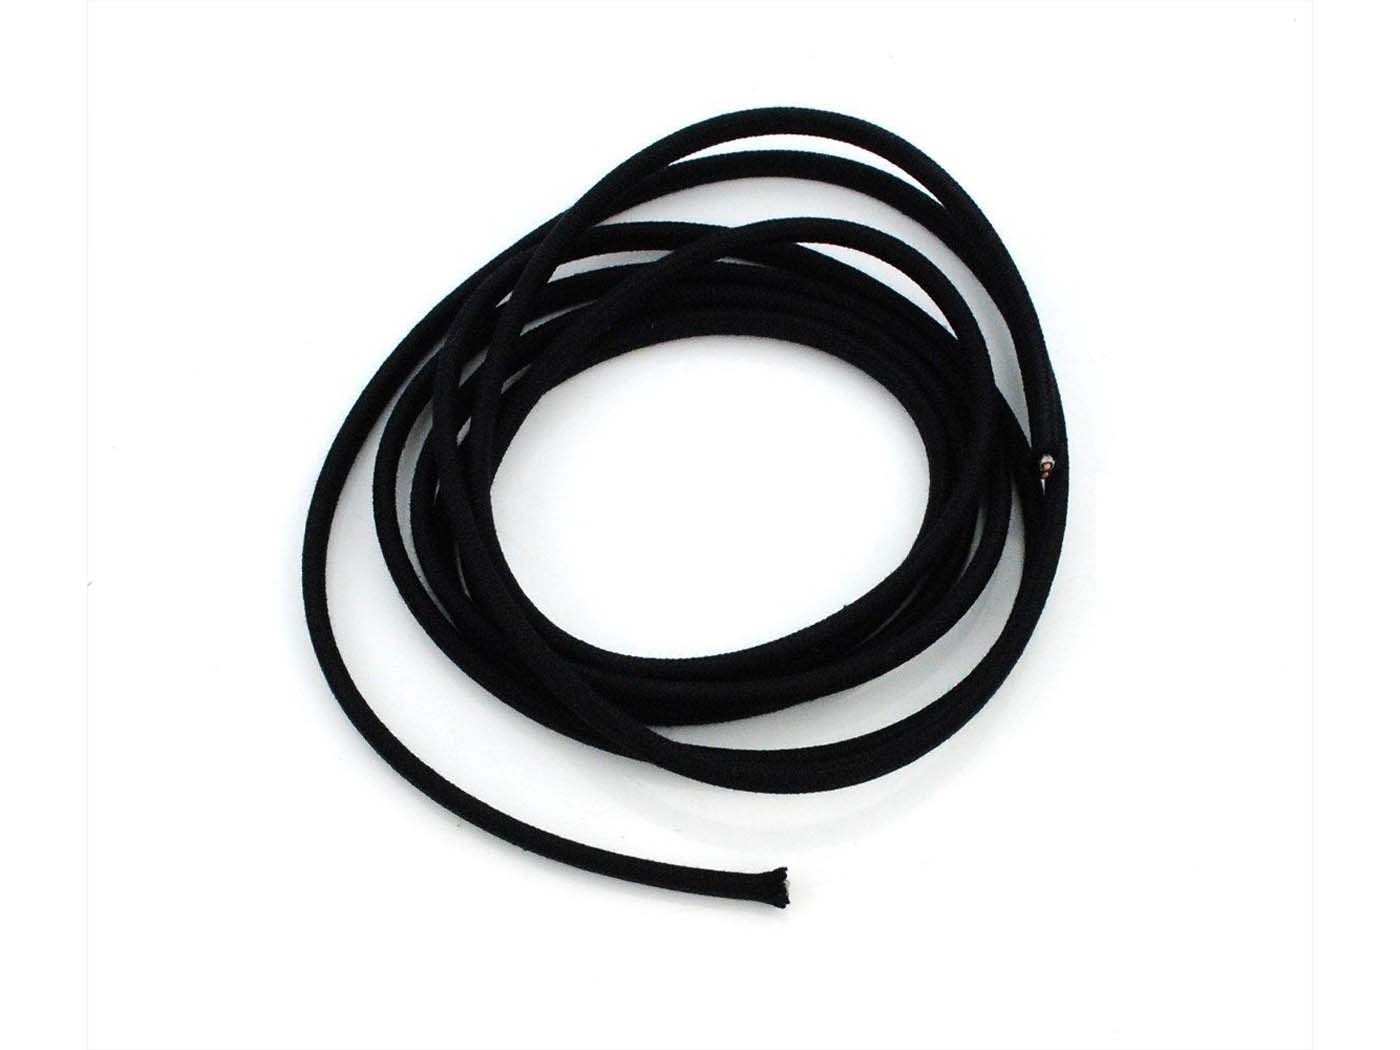 Moped Power Cable 2m 1.0sqm For Moped, Moped, Mokick, Motorcycle, Vintage Scooter